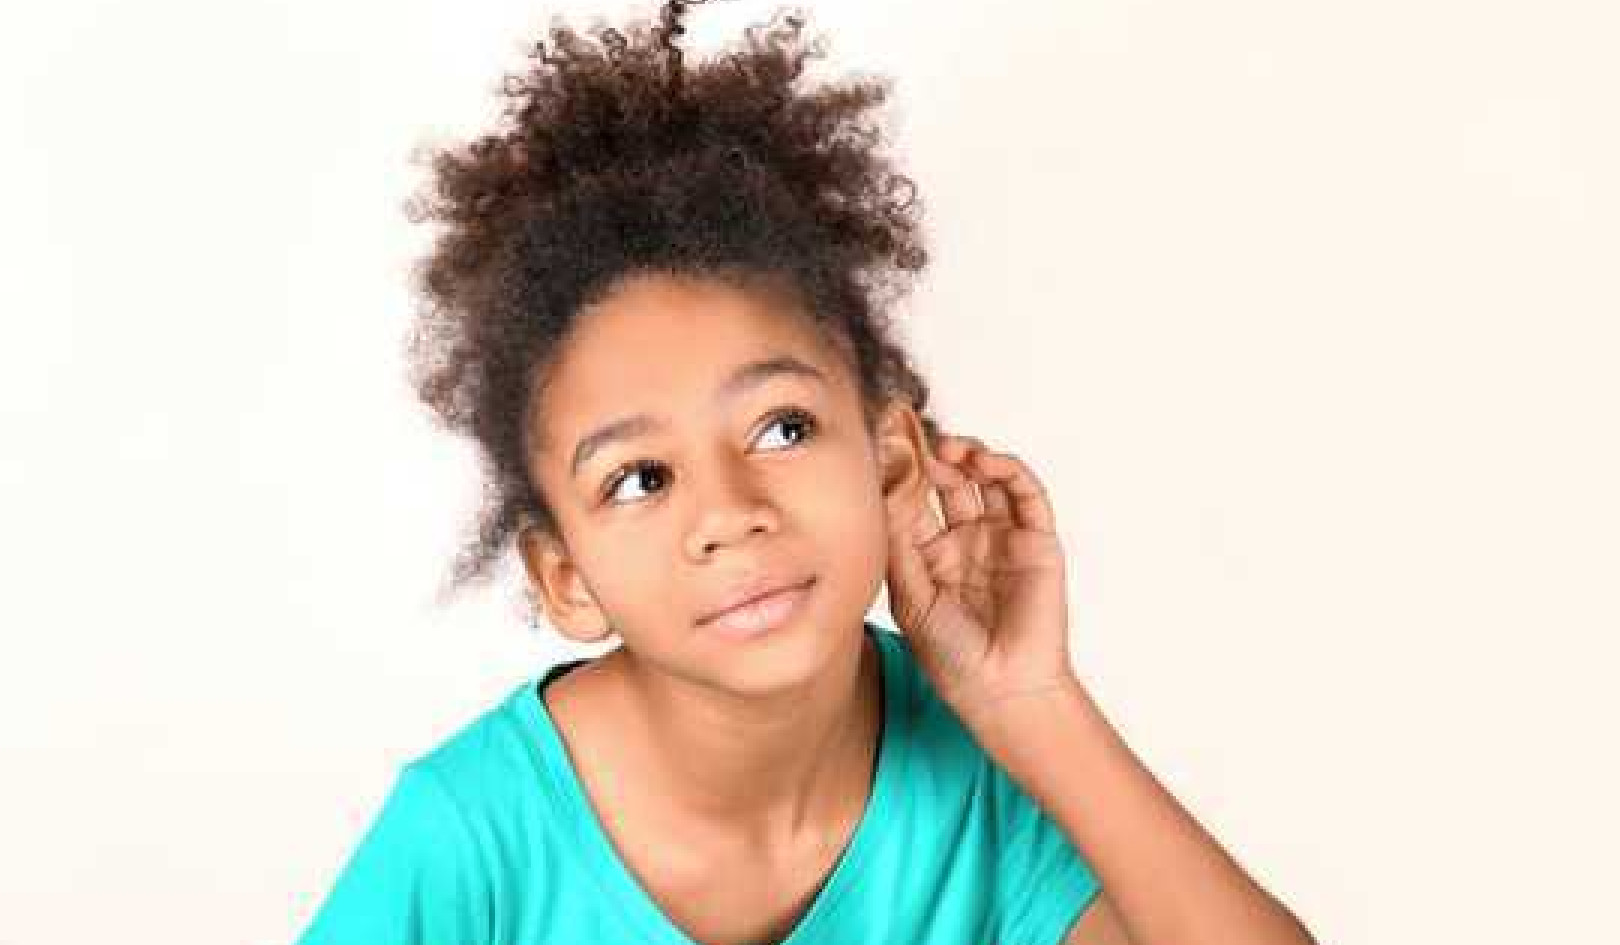 Even Mild Hearing Loss As A Child Can Have Long-term Effects On How The Brain Processes Sound